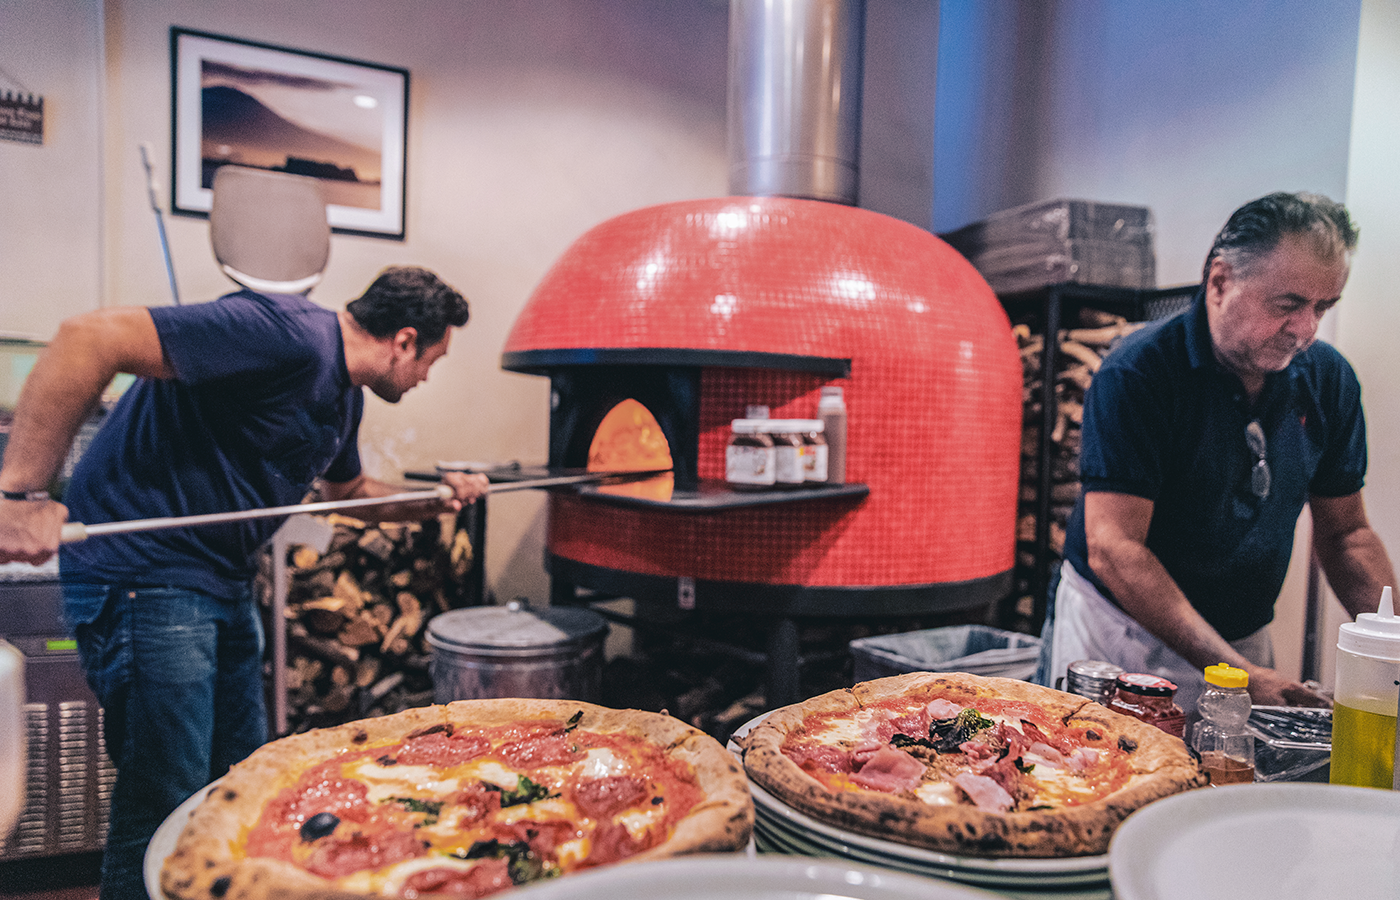 Workers serve up two pizzas from pizza oven 